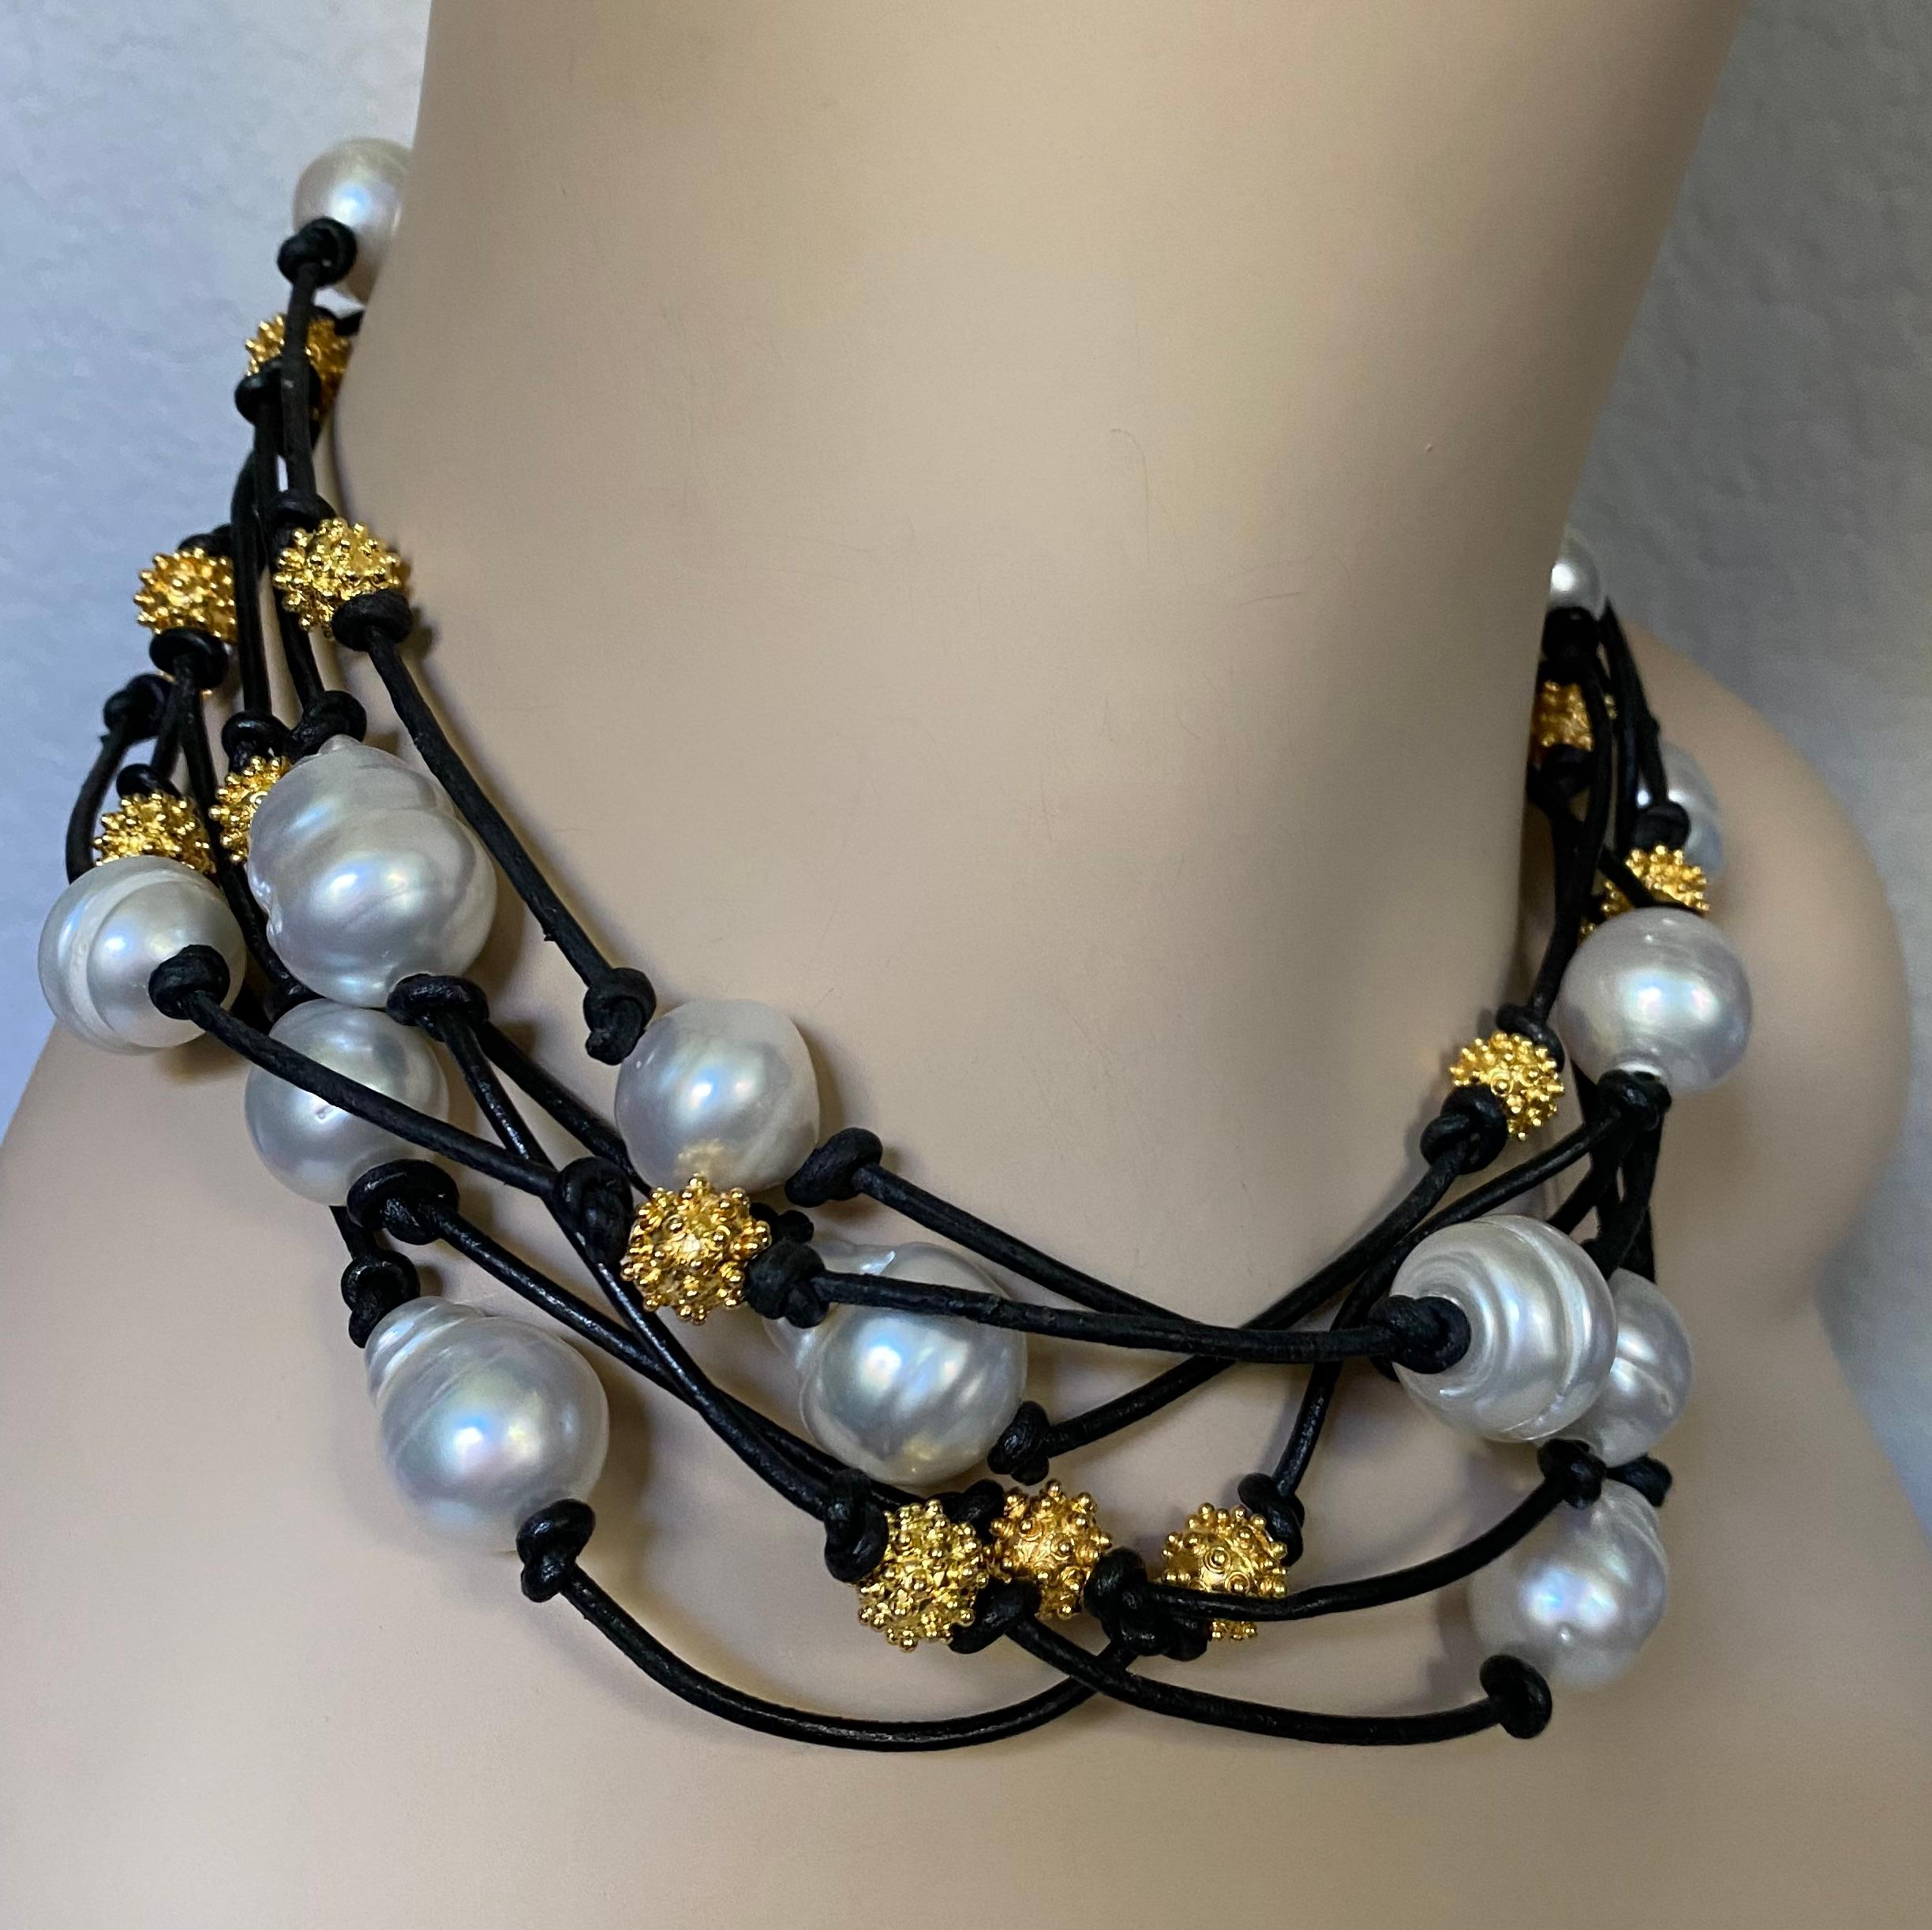 Baroque South Seas pearls are paired with granulated beads in this bold torsade necklace.  The pearls are bright white with irregularities typically found in baroque pearls of all types.  They have been drilled, strung and knotted on a black leather